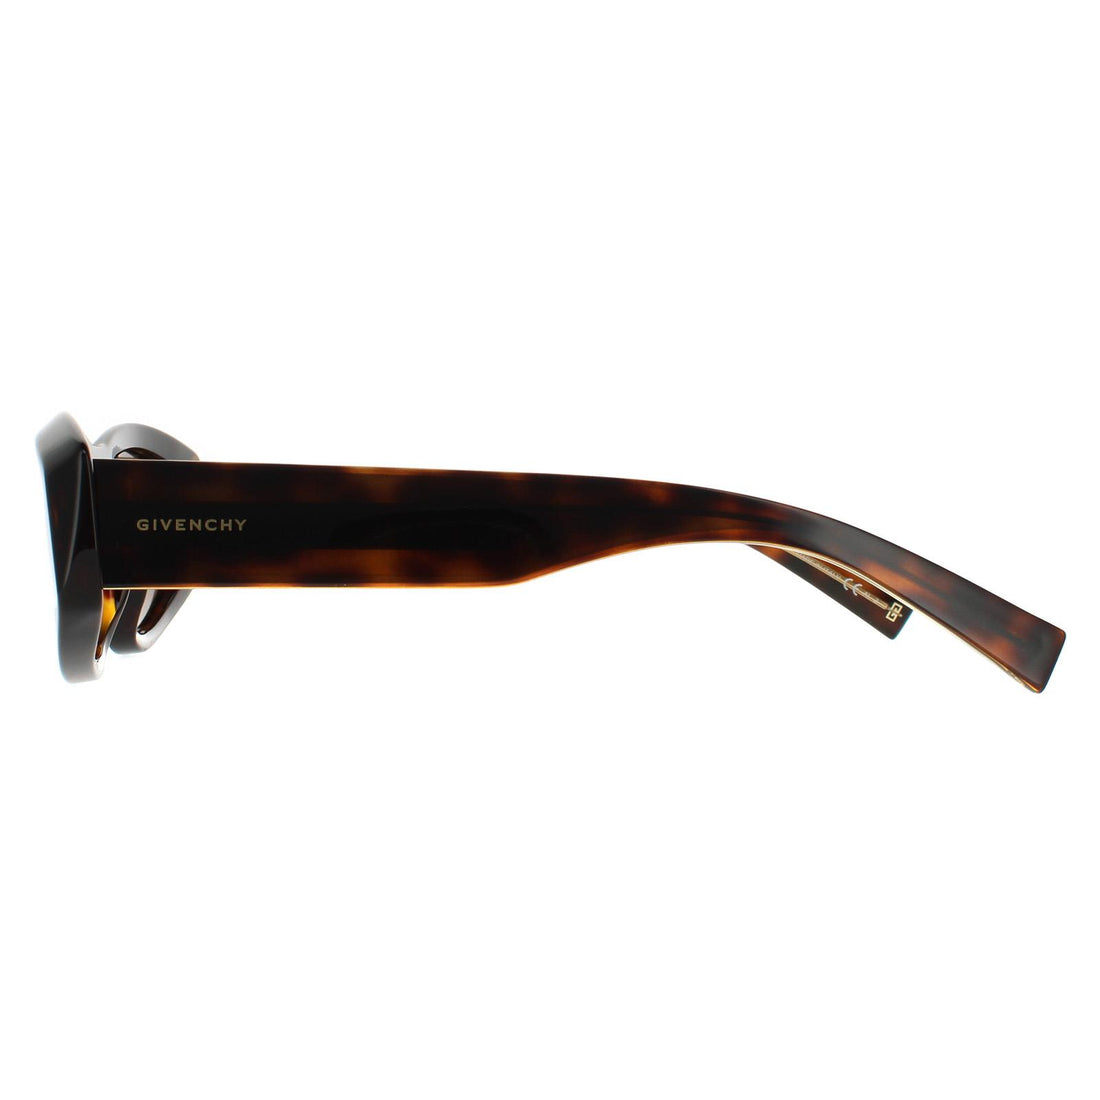 Givenchy Sunglasses GV7154/G/S WR9 70 Brown Havana Brown